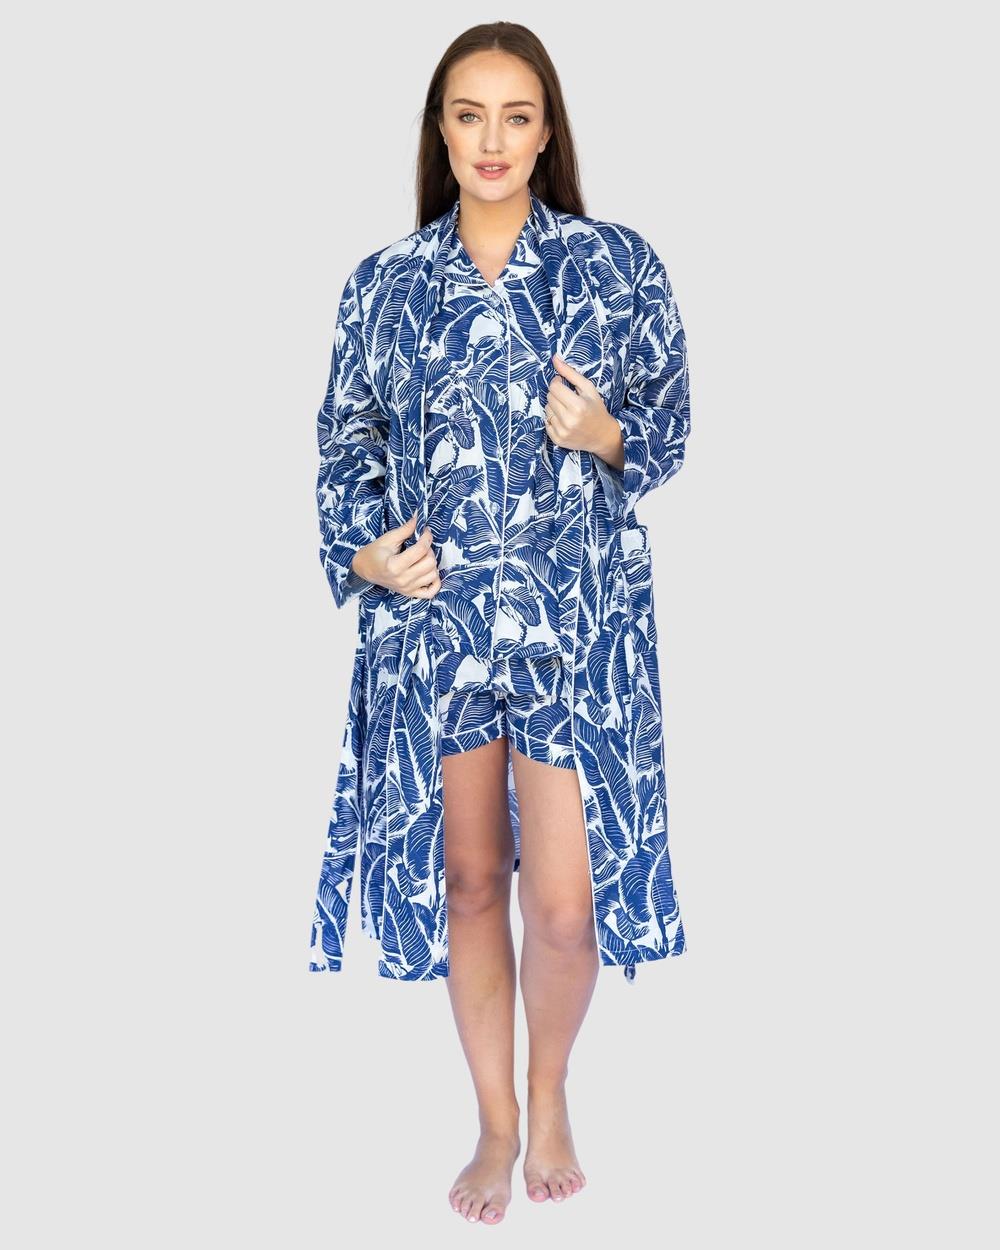 Sant And Abel - Martinique® Navy Banana Leaf Robe - Sleepwear (Navy) Martinique® Navy Banana Leaf Robe